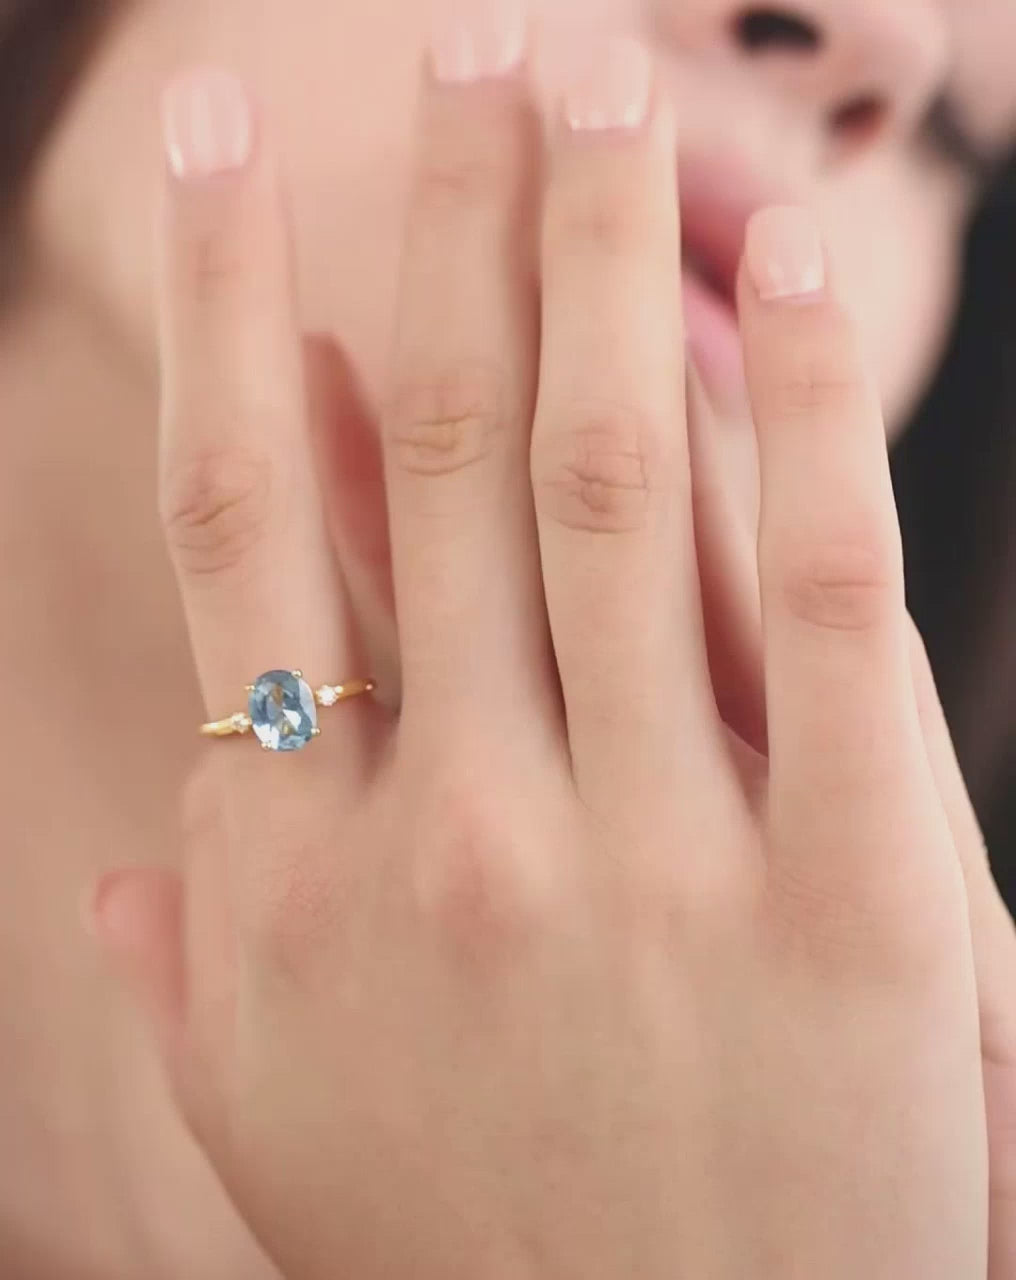 Model wearing the blue spinel ring